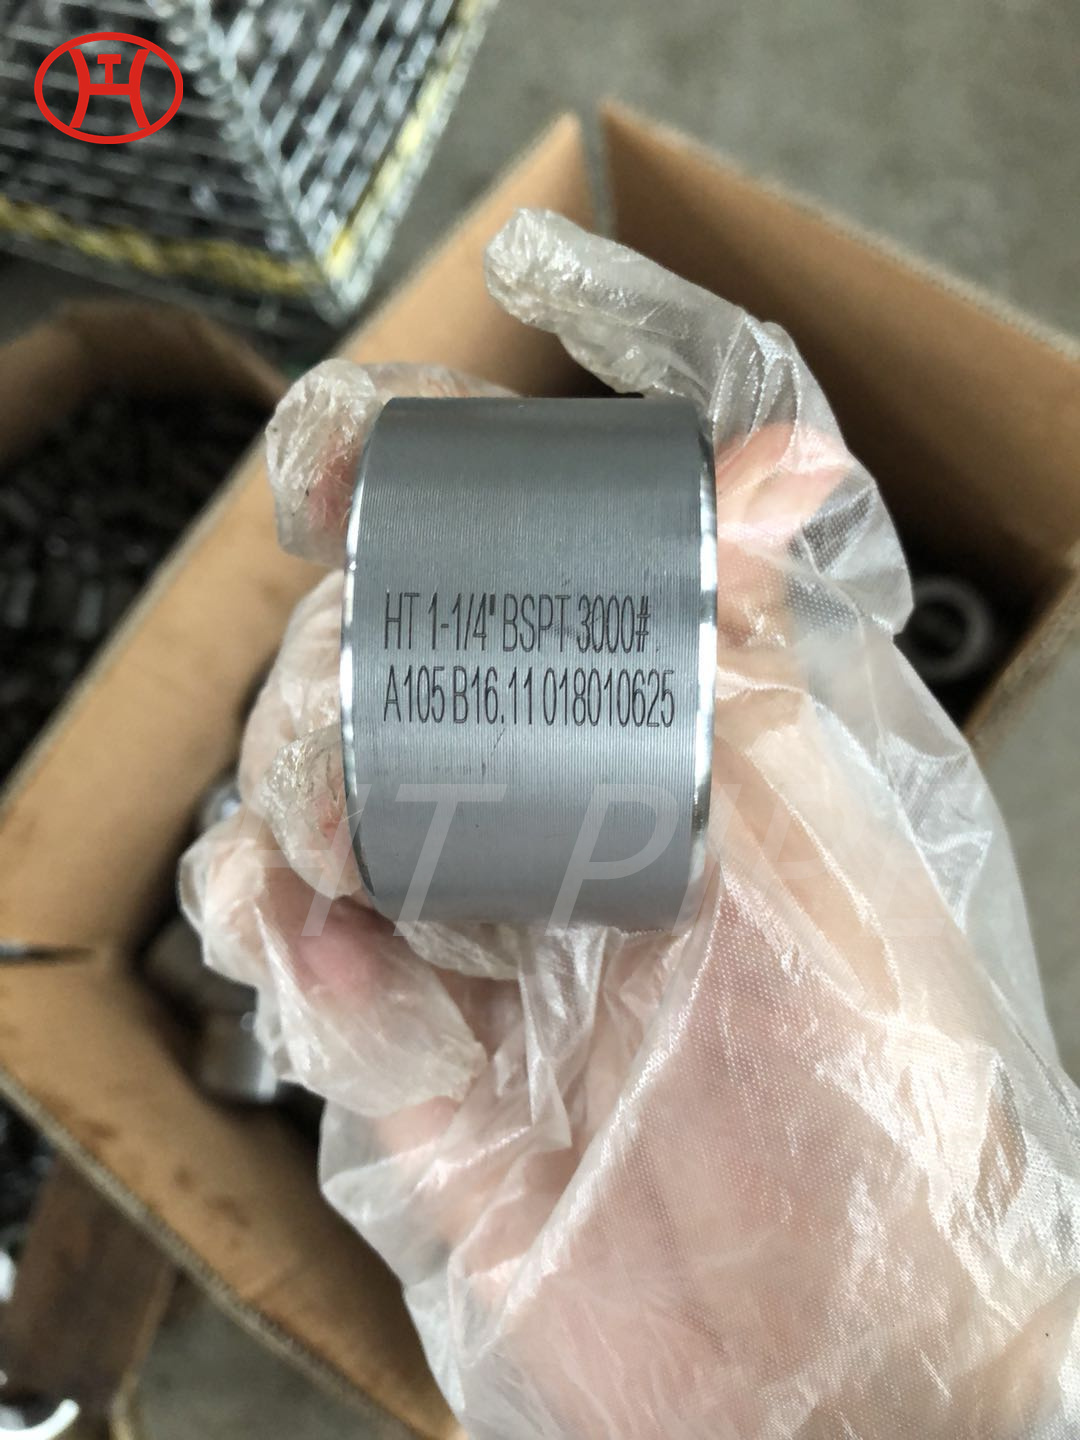 A105 B16.11 3000# half coupling exported to Malaysia